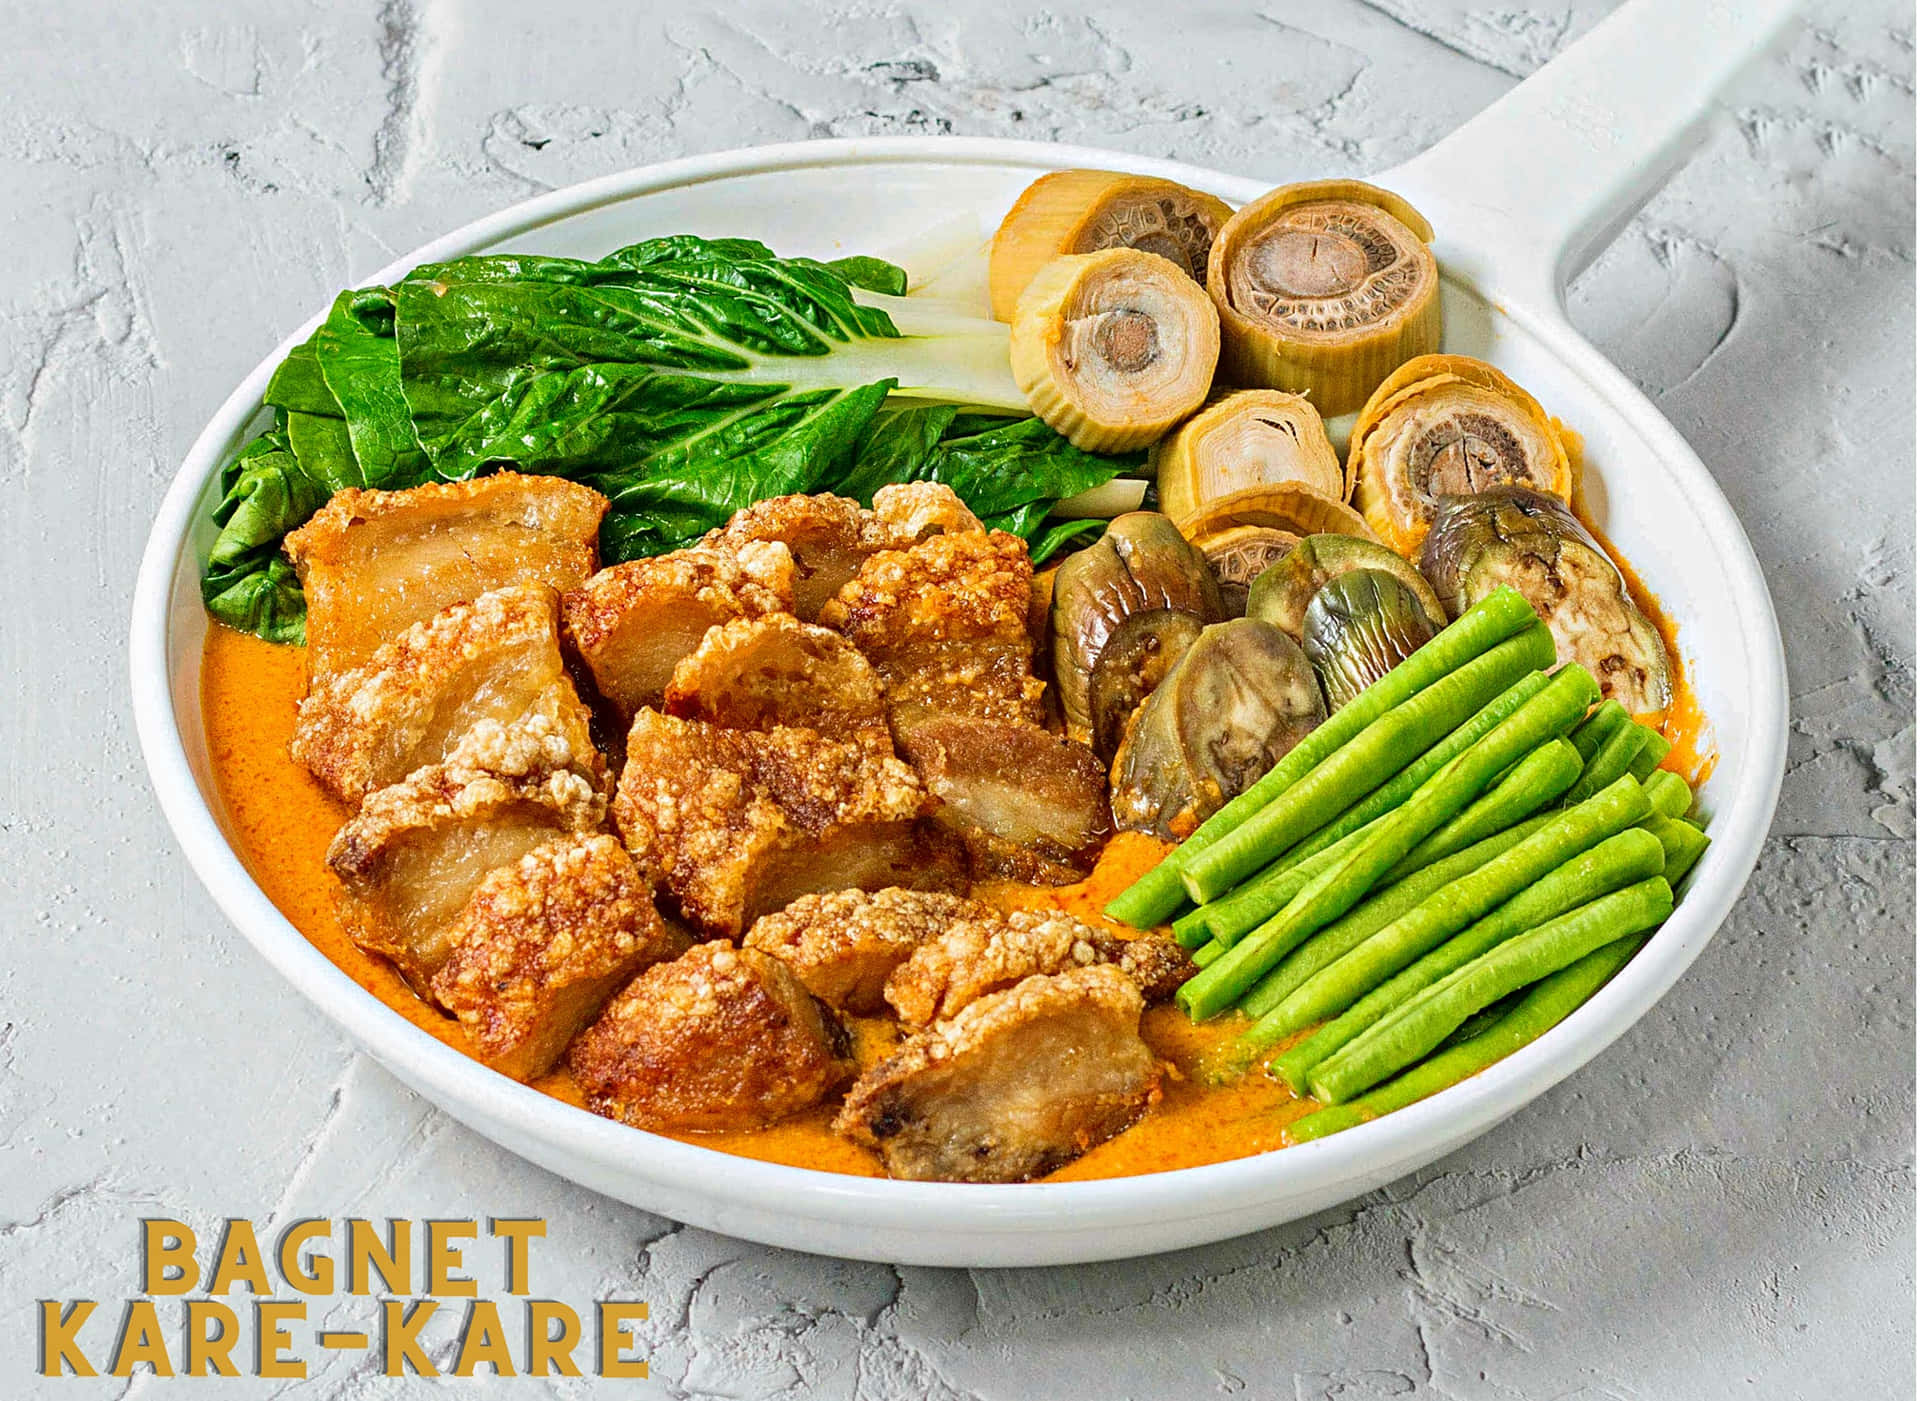 Kare-kare Served In A White Bowl Picture